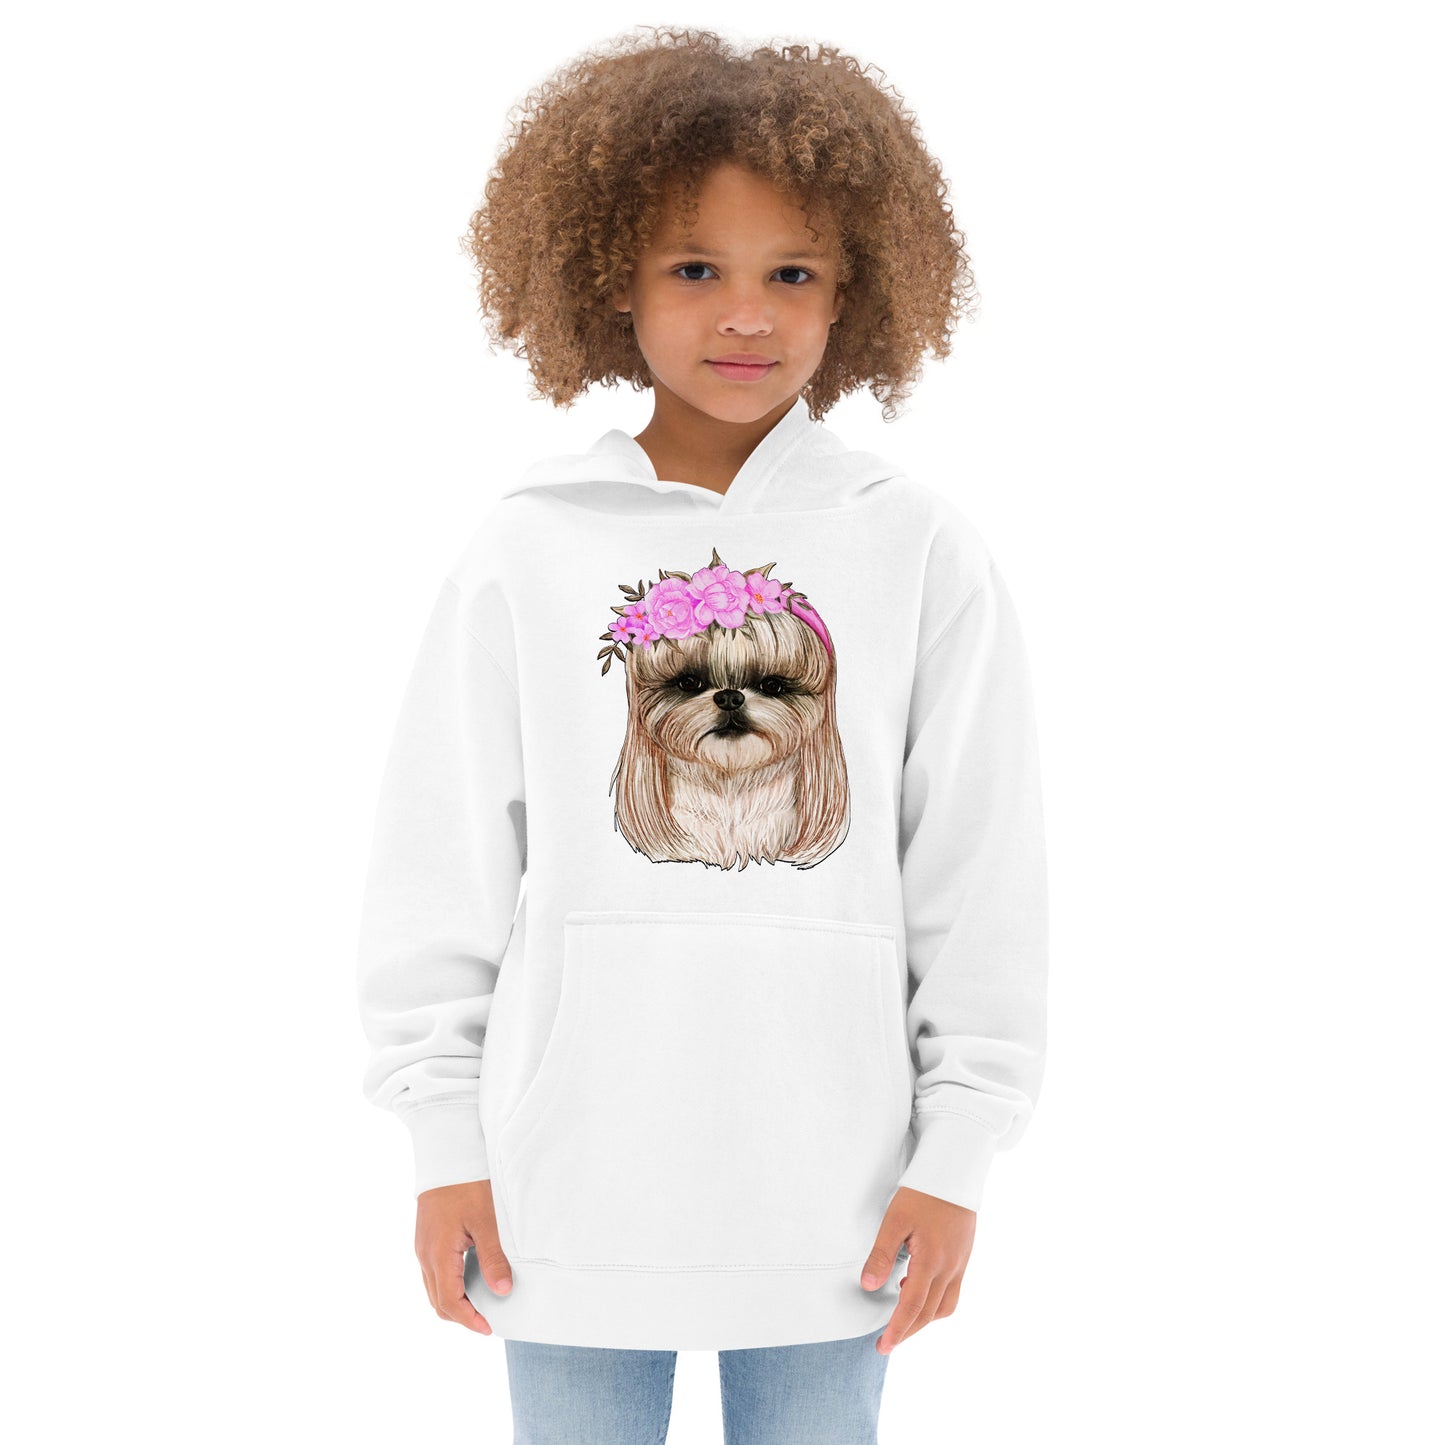 Adorable Dog with Flower Hair Crowns Hoodie, No. 0562